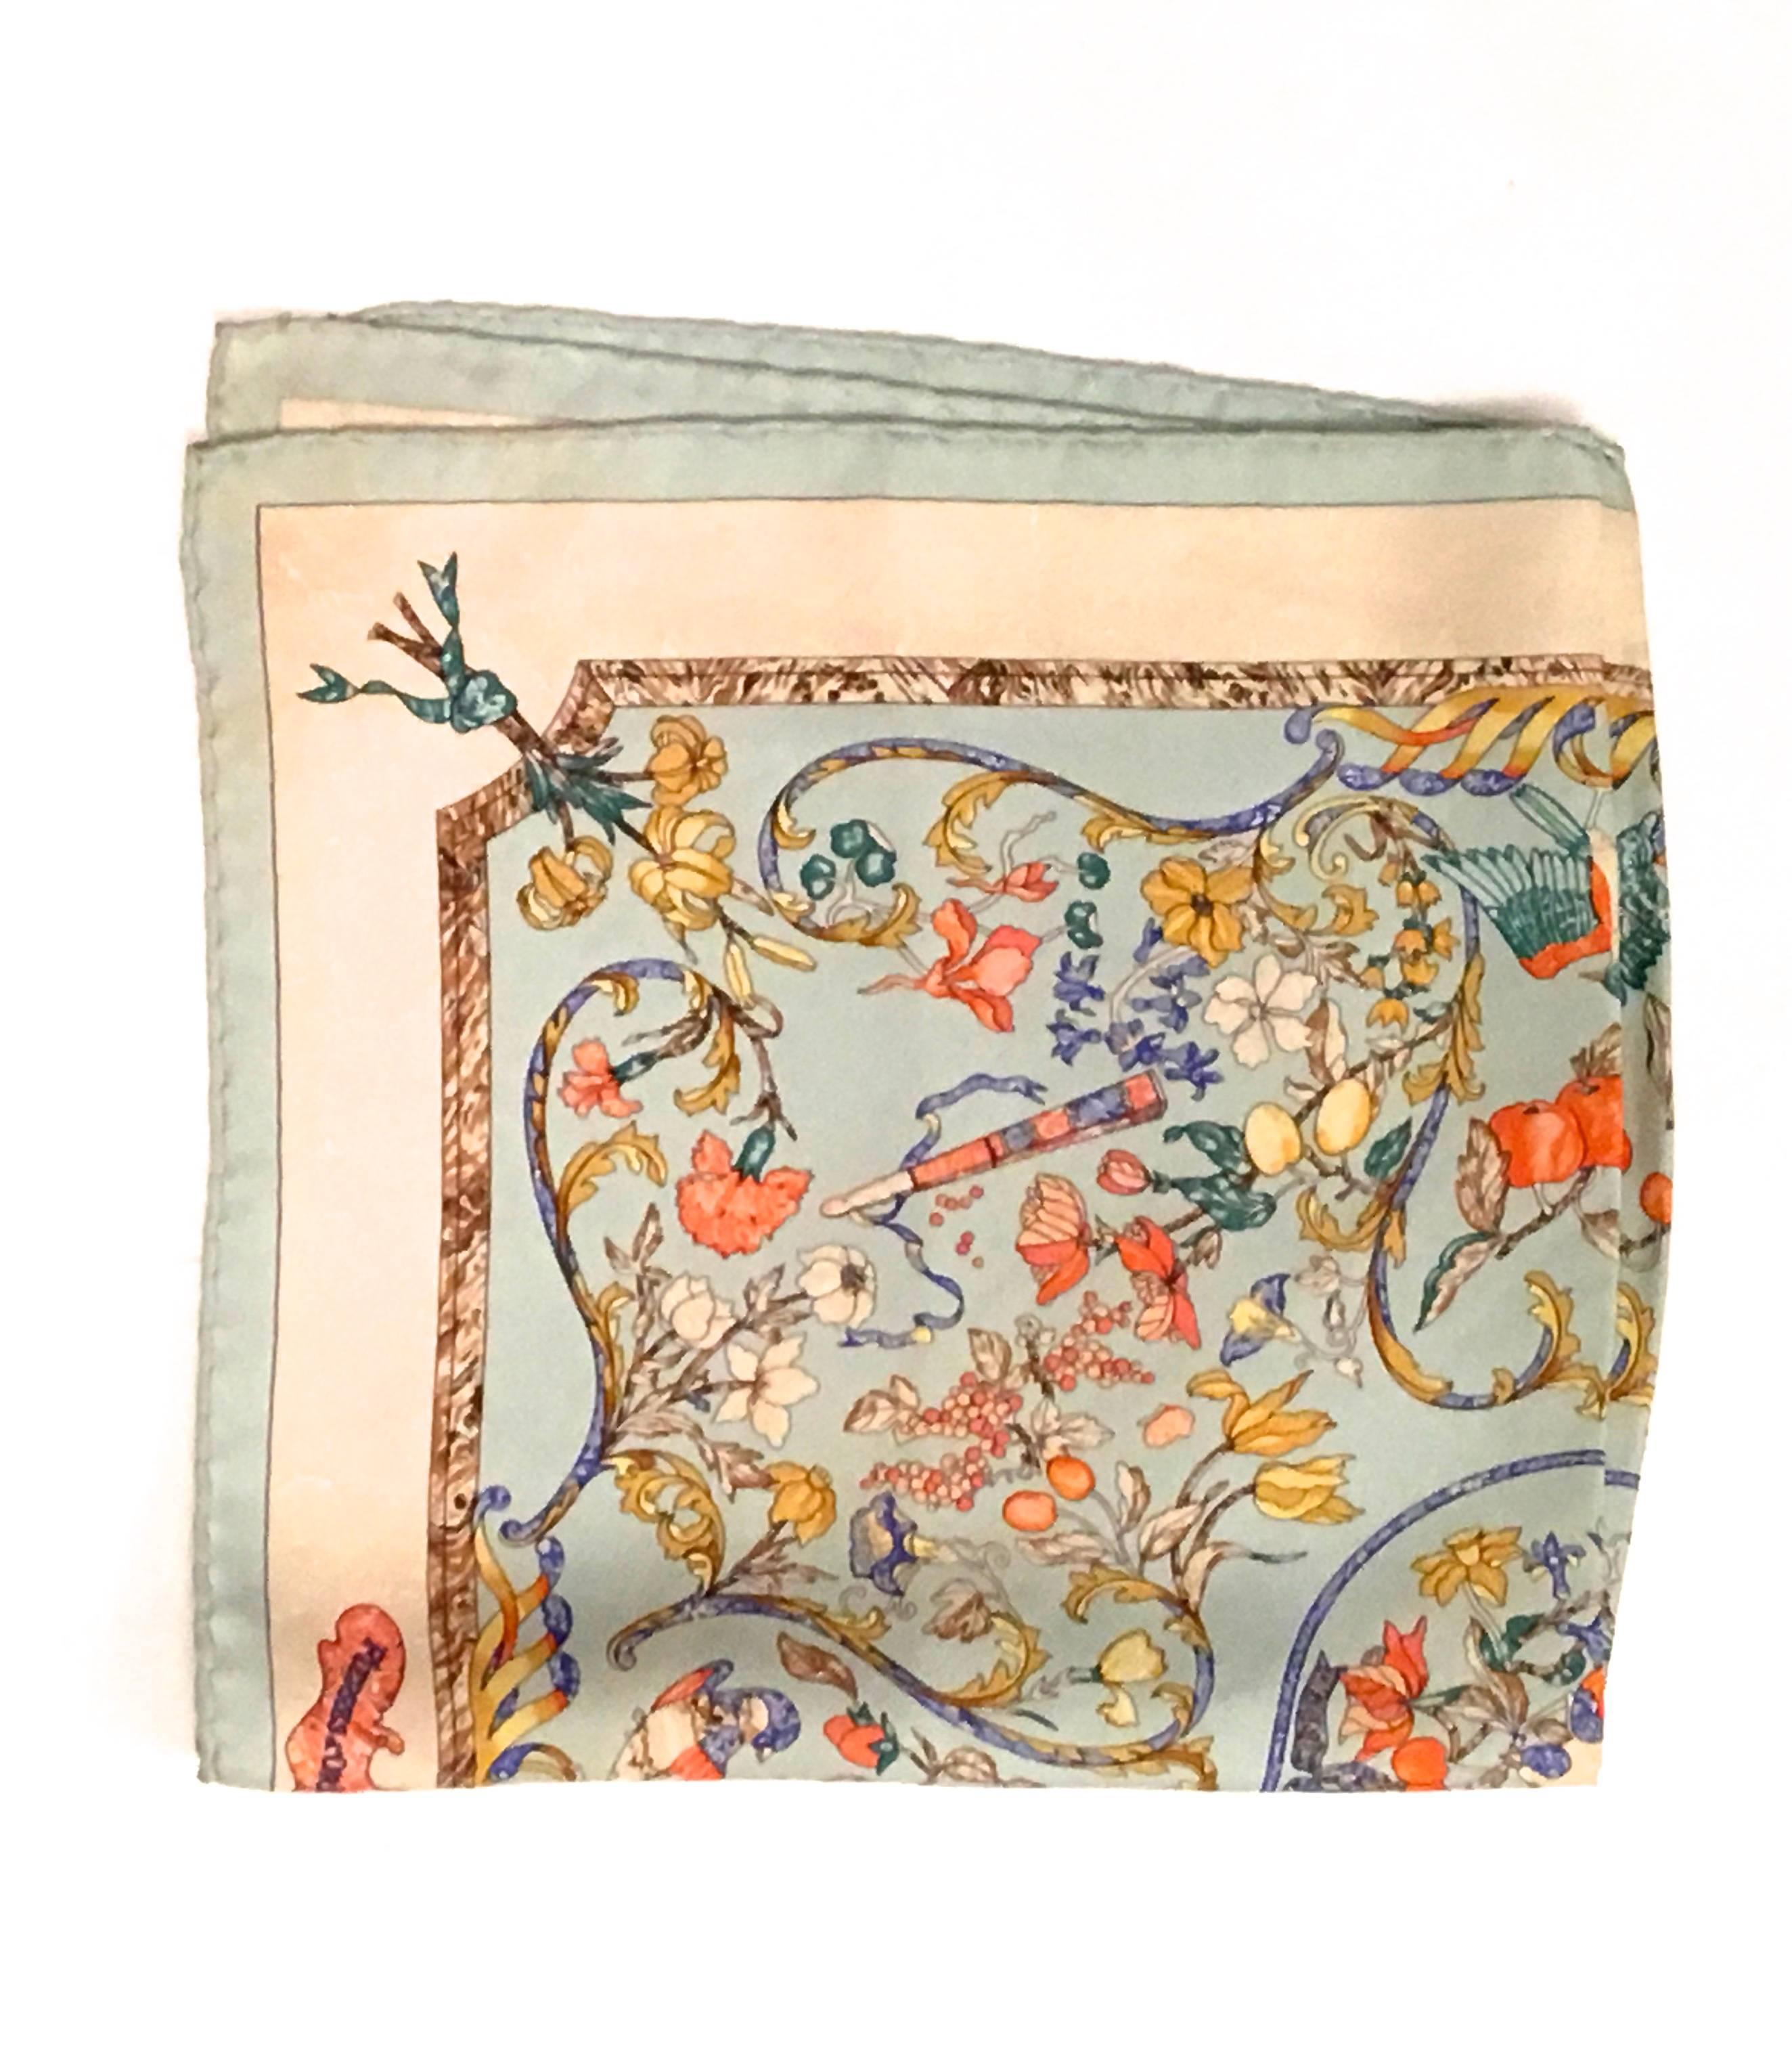 Presented here is a gorgeous vintage scarf from Hermes Paris. This beautiful scarf has a floral design that also has birds implemented as well. The color scheme incorporates shades of blue, red, yellow, purple, green, creamy white and brown.